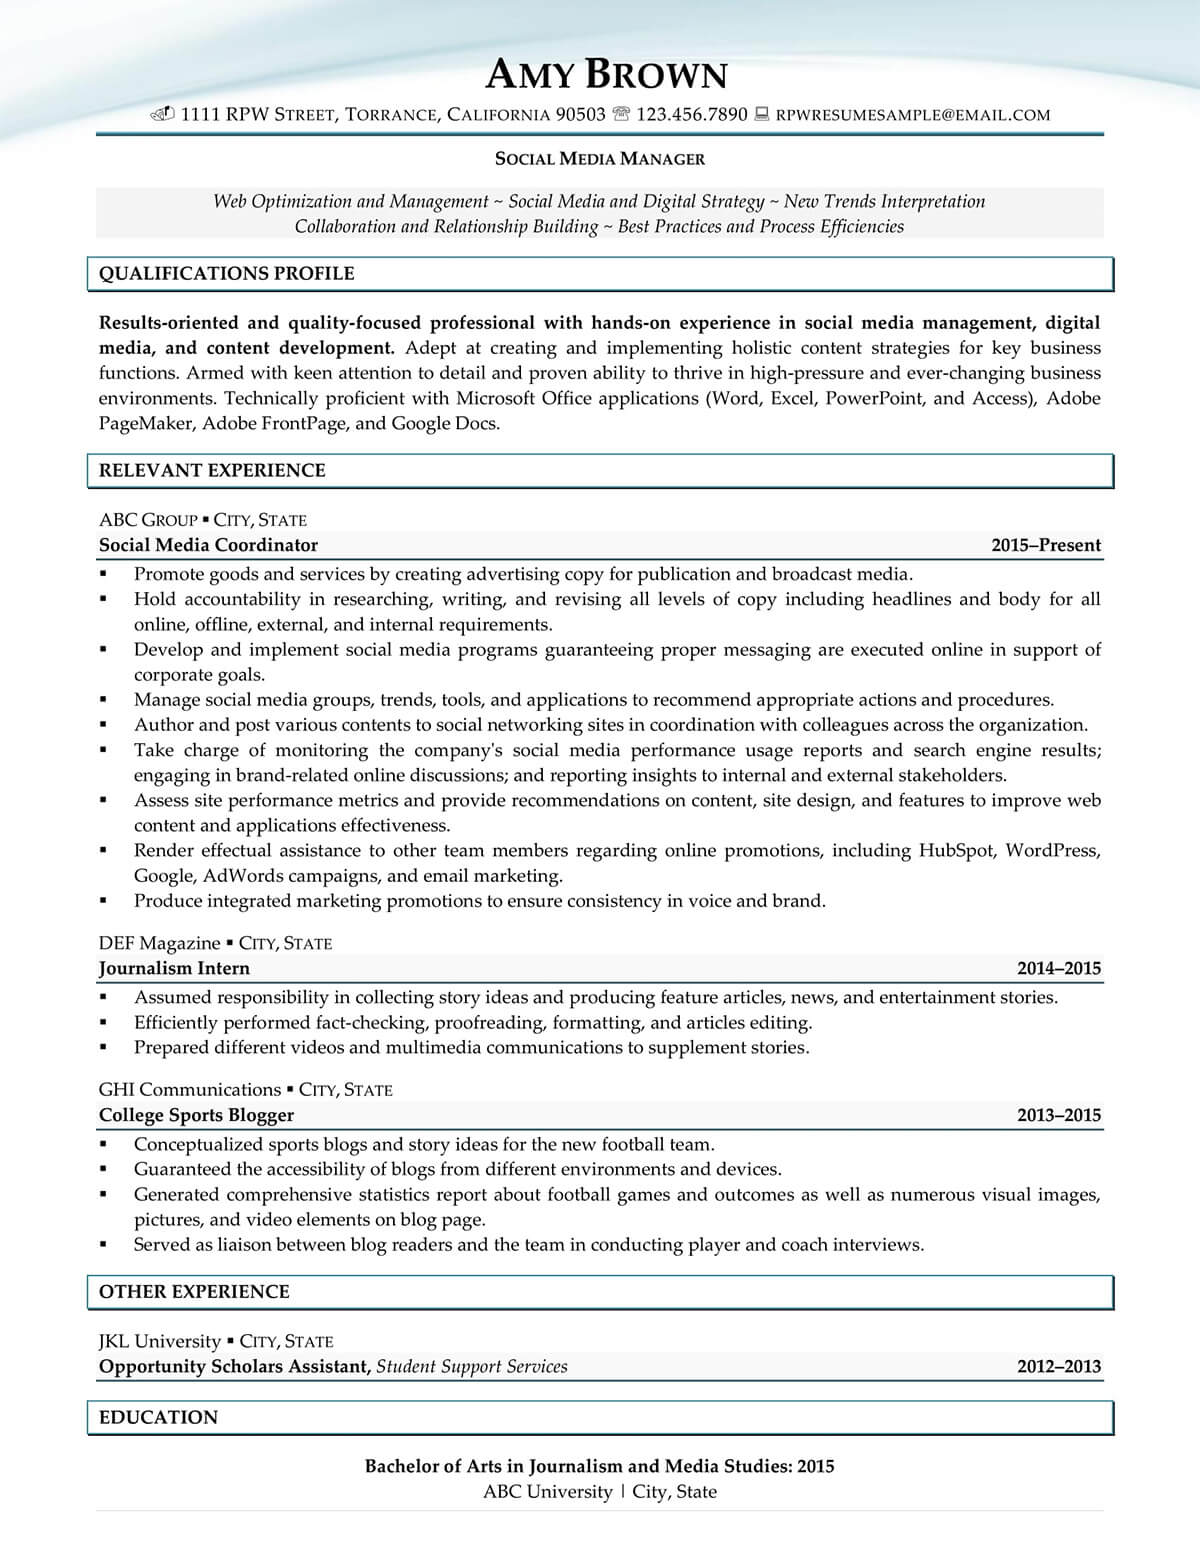 Resume Professional Writers' Social Media Manager Resume Example